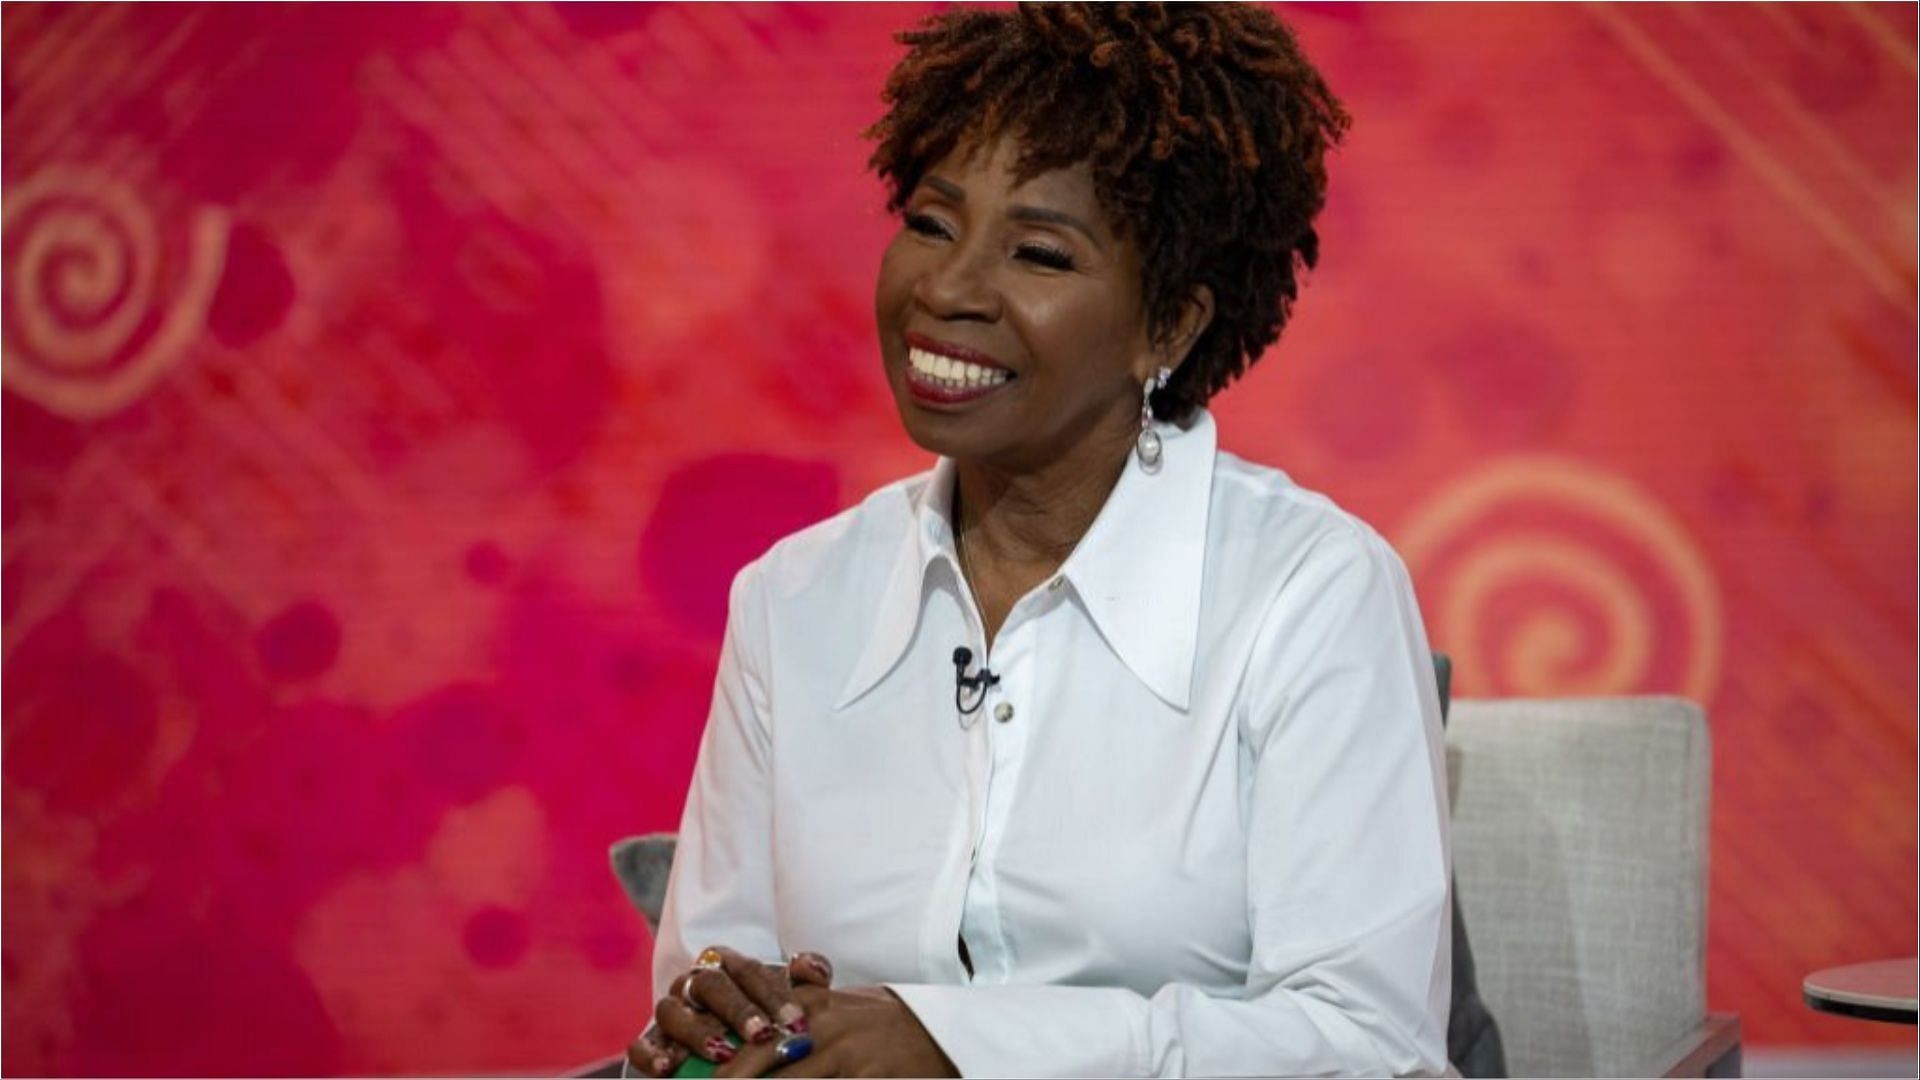 Iyanla Vanzant has announced the death of her daughter (Image via Nathan Congleton/Getty Images)